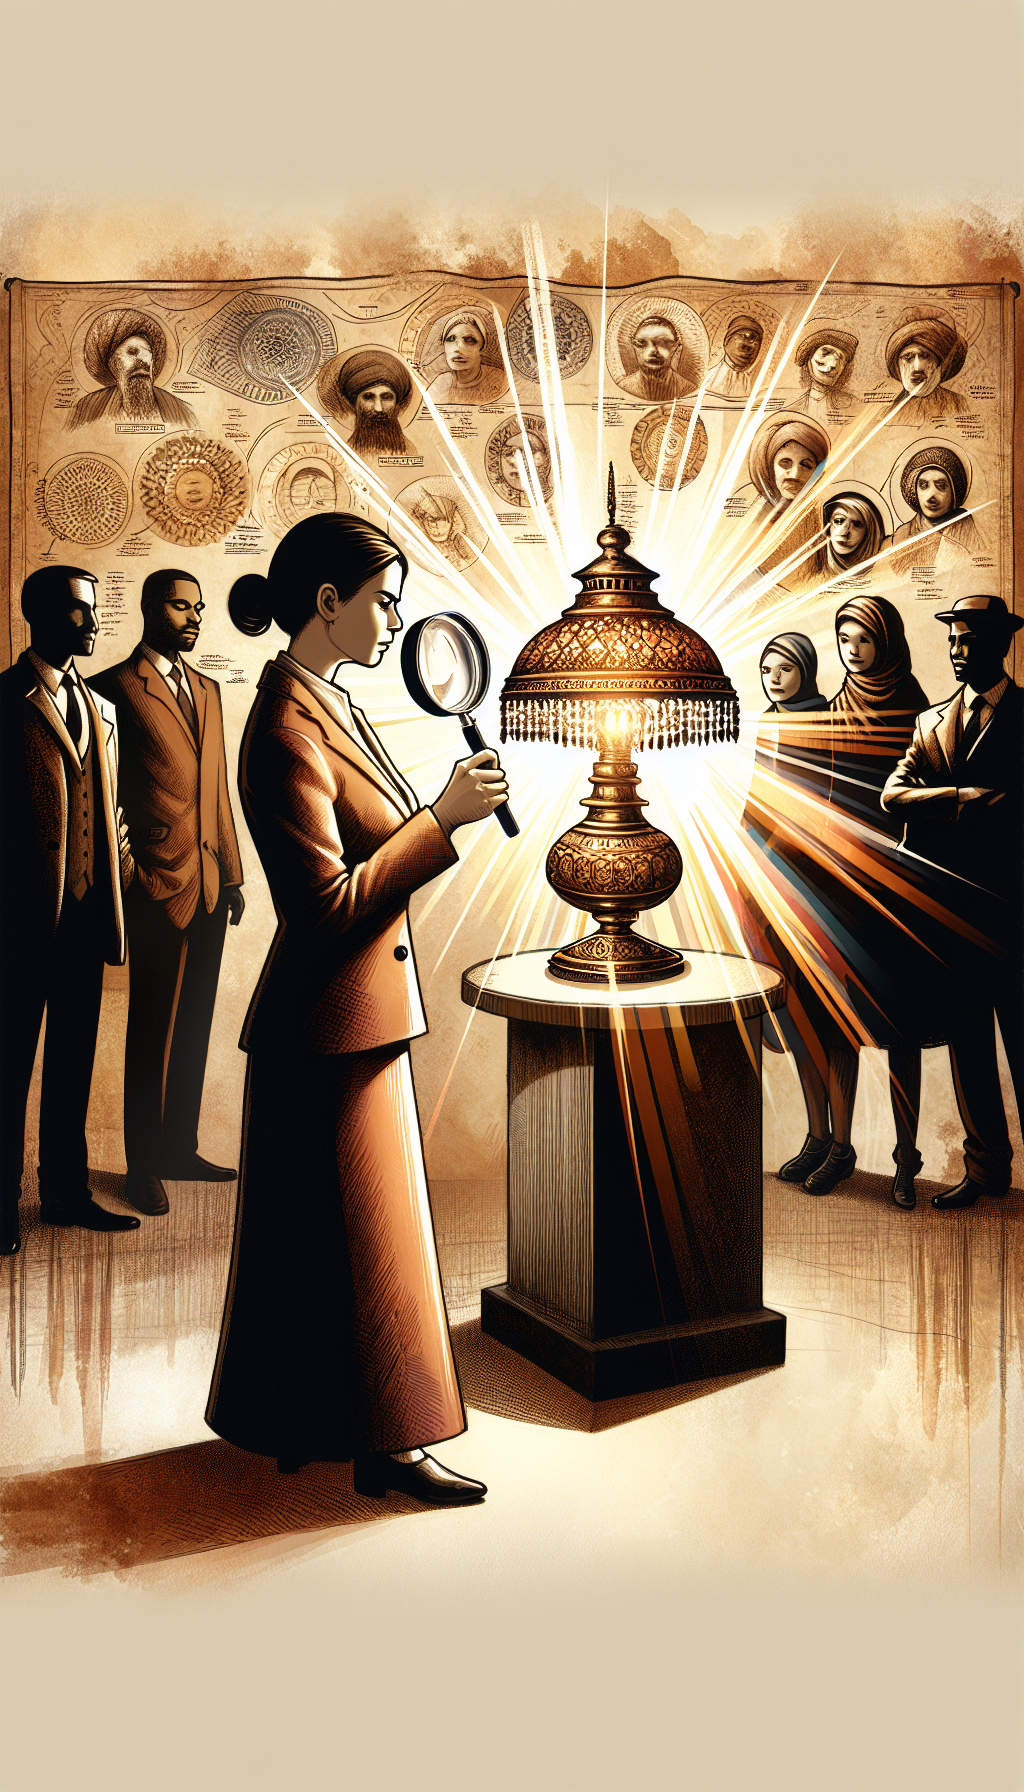 An illustration where a detective magnifying glass hovers over a glowing antique lamp, revealing a tapestry of its history – with dates, original owners, and cultural origins in the light beam – while shadowy figures appraise its value. The scene is a blend of sepia tones and vibrant watercolor splashes that signify the lamp's rich provenance and inherent value.